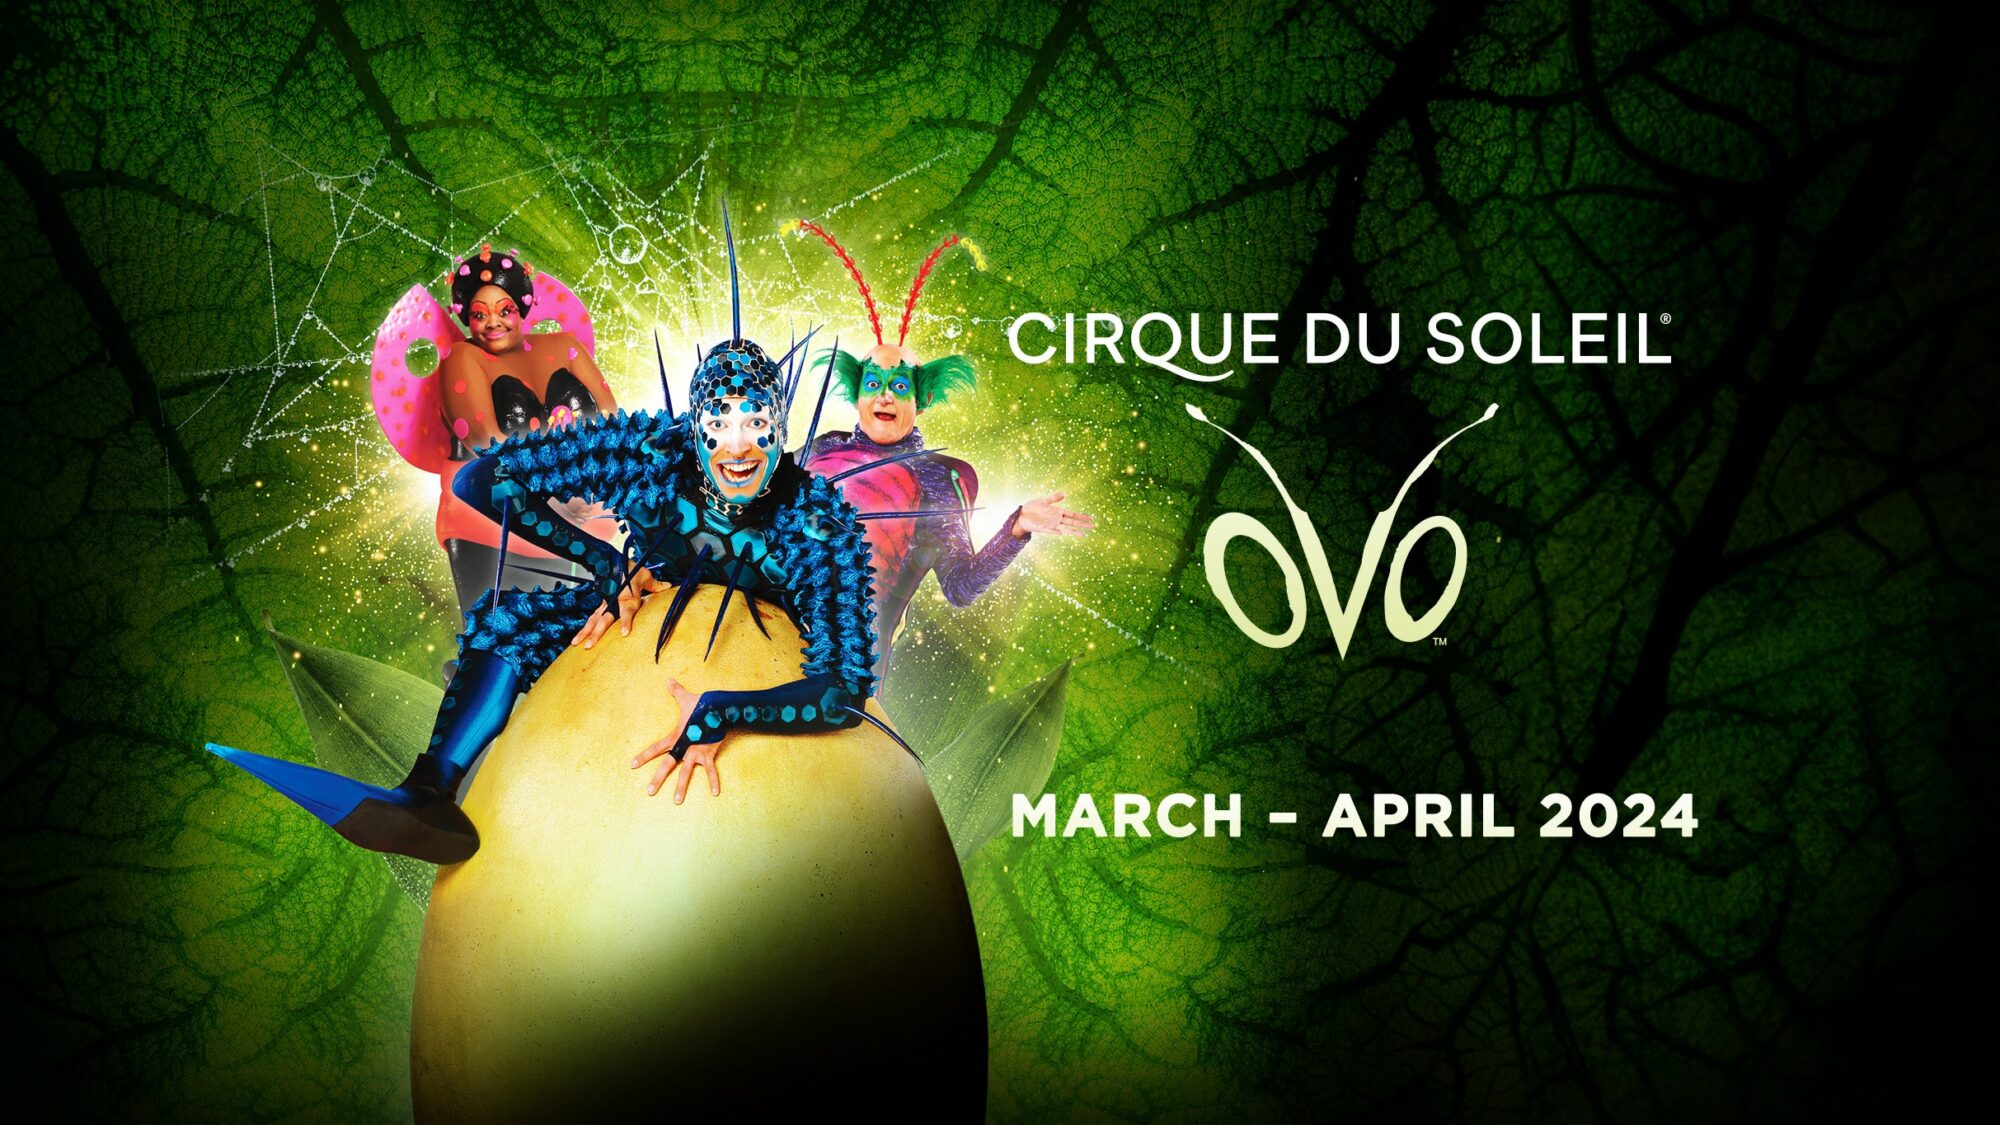 Image name Cirque Du Soleil Ovo at First Direct Arena Leeds the 2 image from the post Cirque Du Soleil : Ovo at First Direct Arena, Leeds in Yorkshire.com.